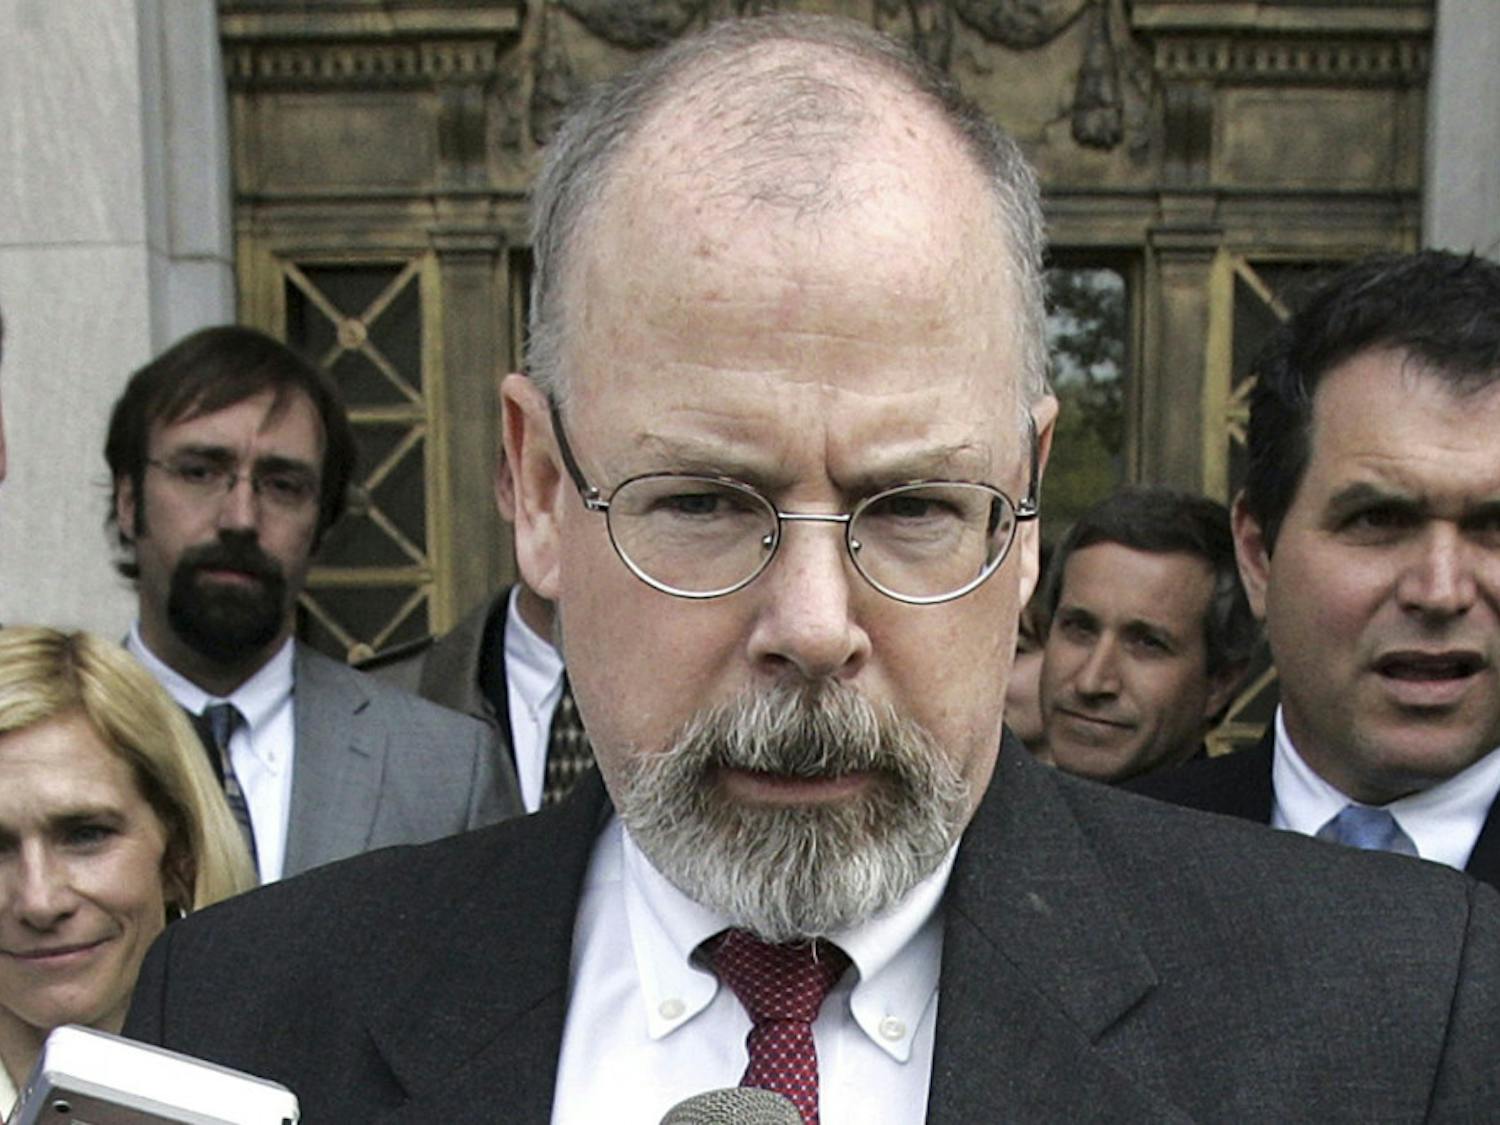 FILE - In this April 25, 2006, file photo, John Durham speaks to reporters on the steps of U.S. District Court in New Haven, Conn. Durham, Connecticut’s U.S. attorney, is leading the investigation into the origins of the Russia probe. He is no stranger to high-profile, highly scrutinized investigations. (AP Photo/Bob Child, File)